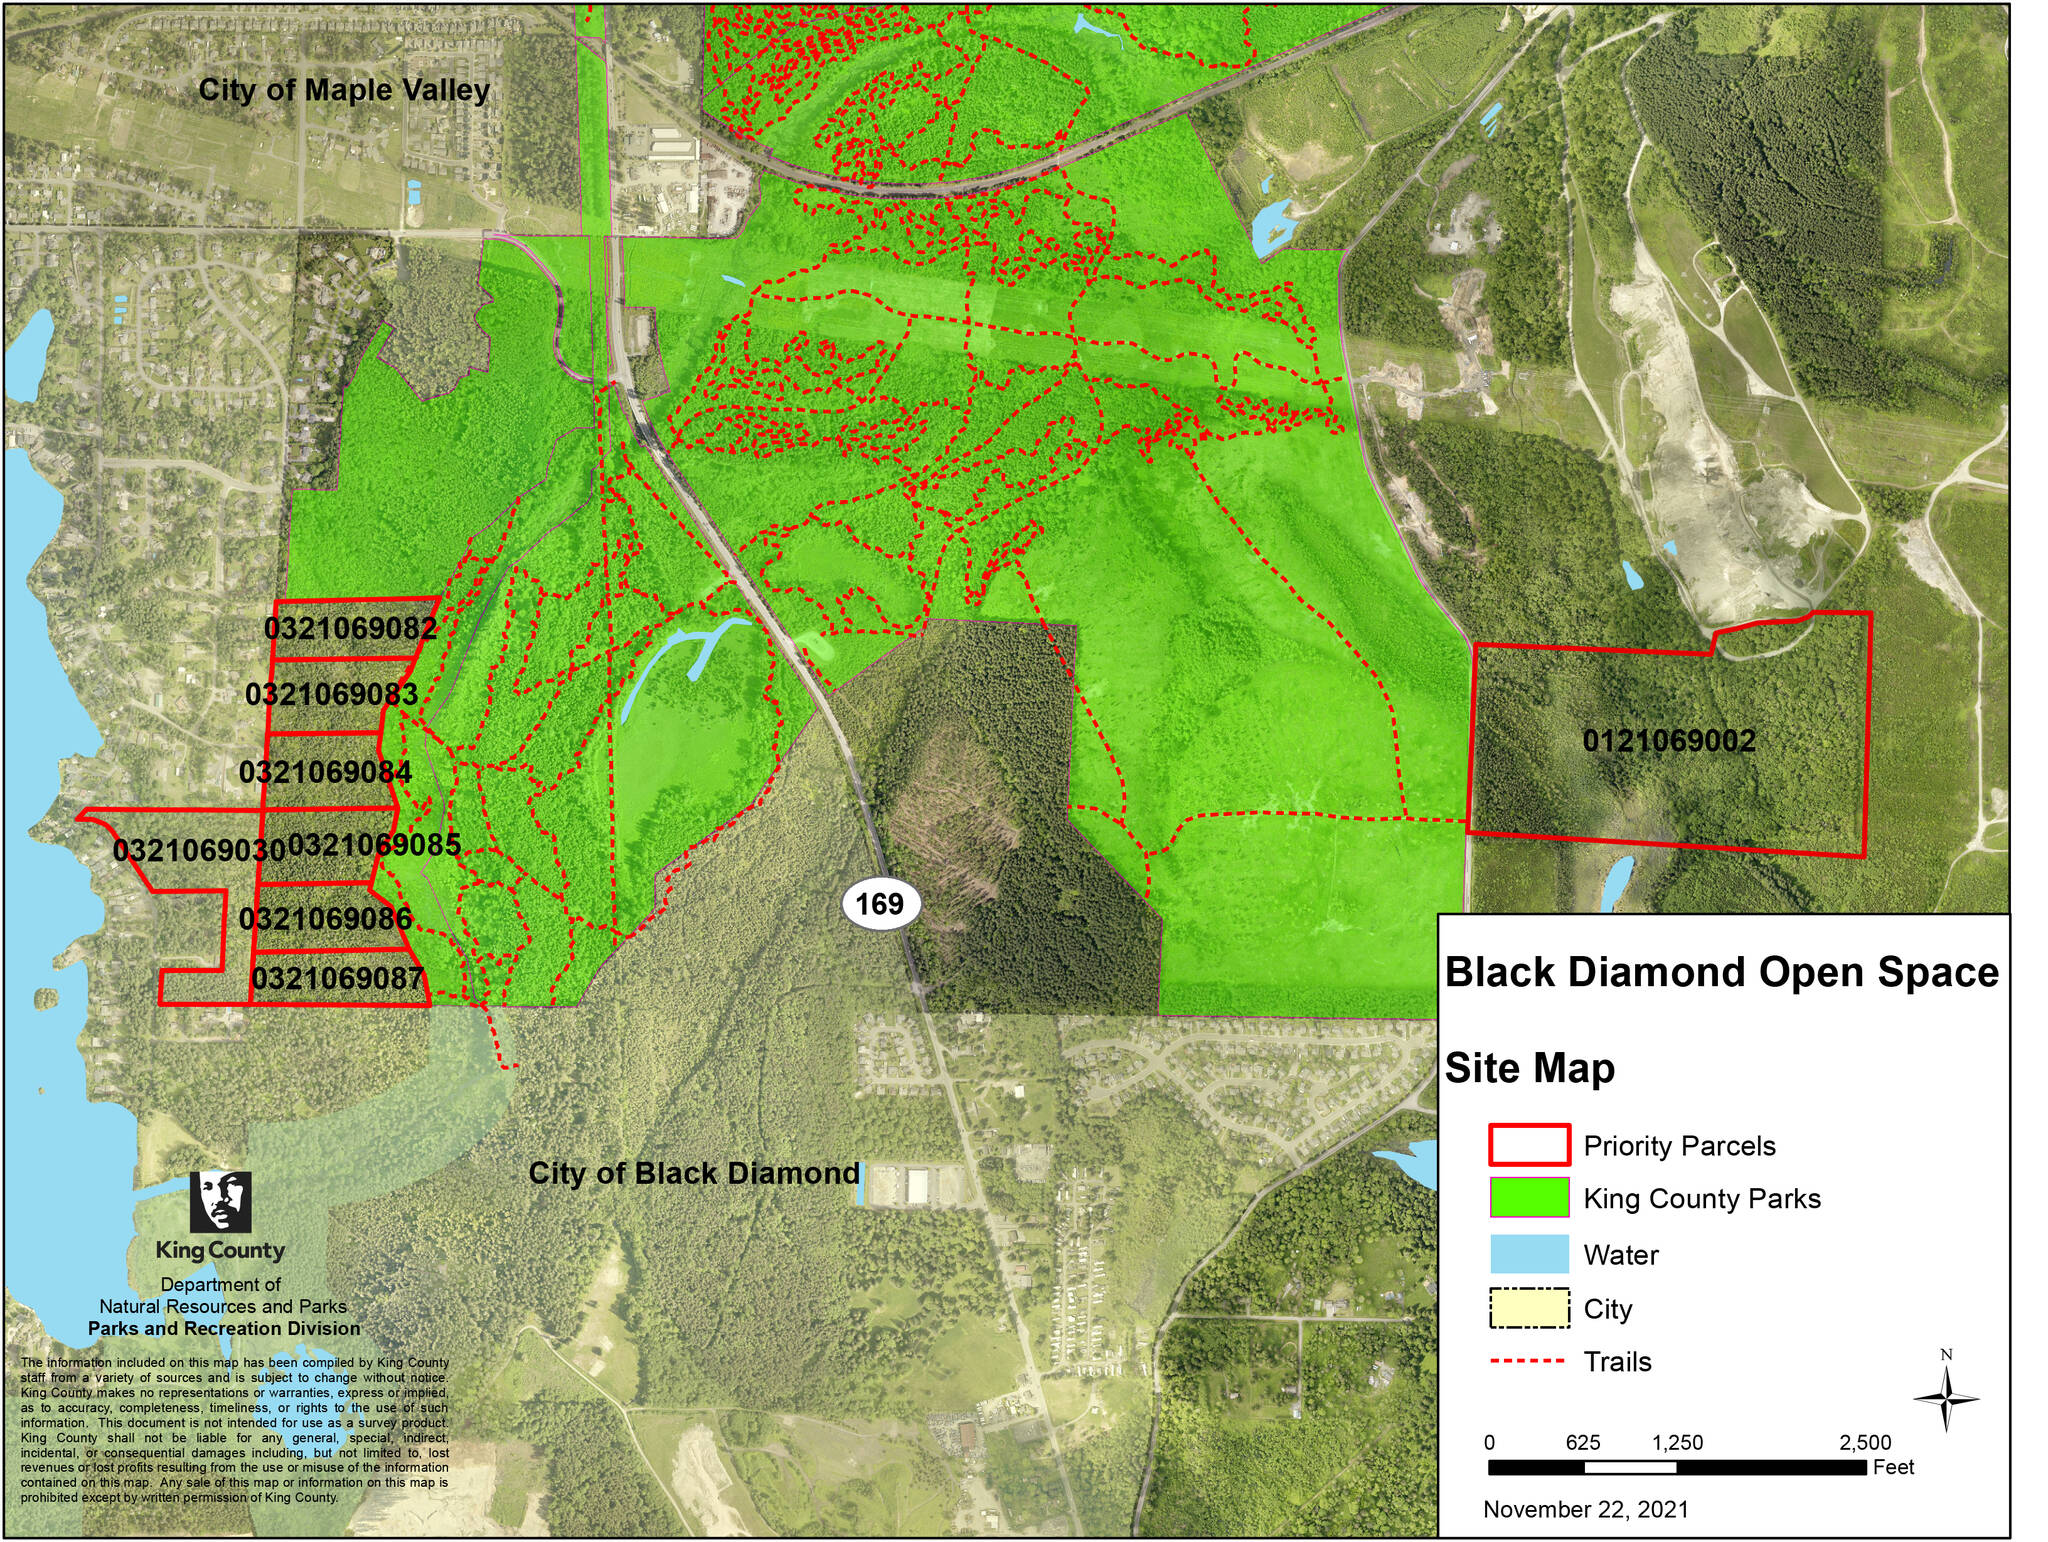 A map of the trails in the Black Diamond Open Space, and what parcels a nearly $3 million grant could purchase, further protecting unincorporated King County from urban sprawl. Image courtesy King County